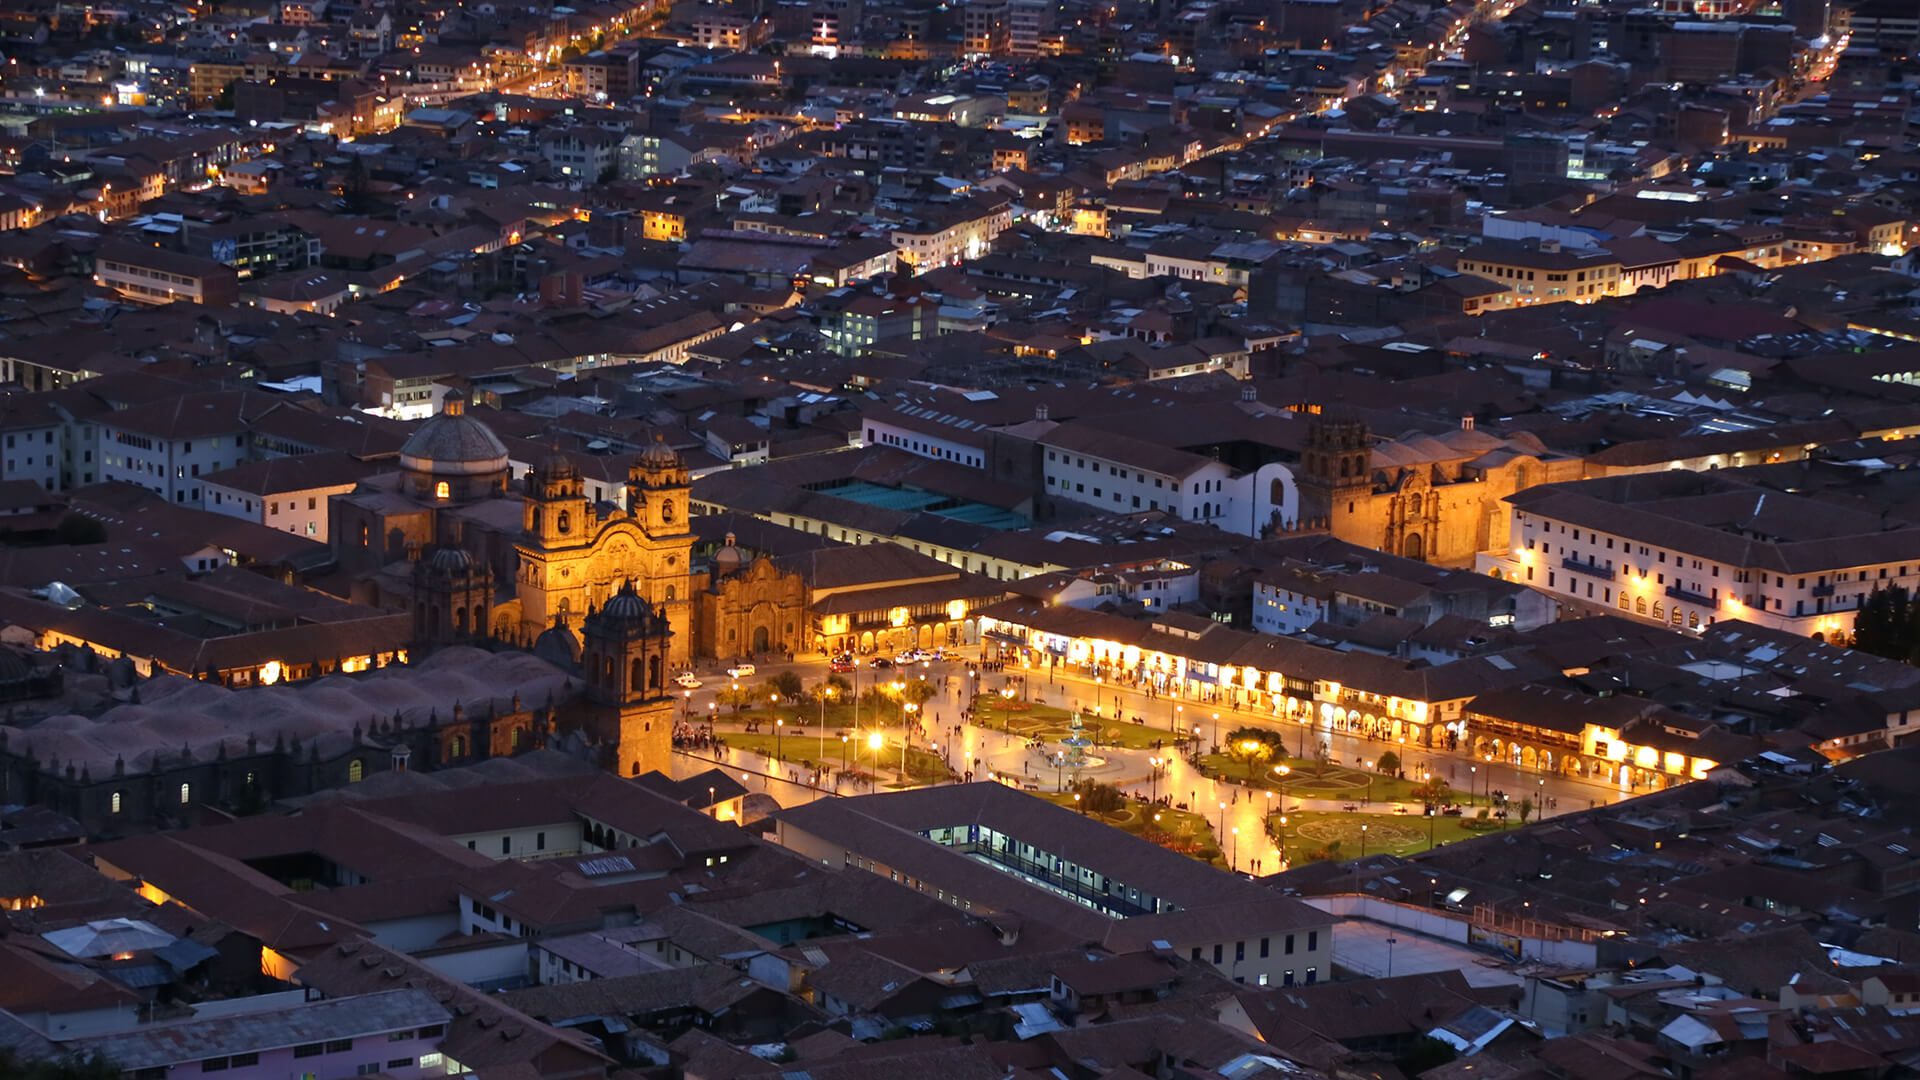 Cusco main square or Plaza de Armas at night from the Cristo Blanco lookout